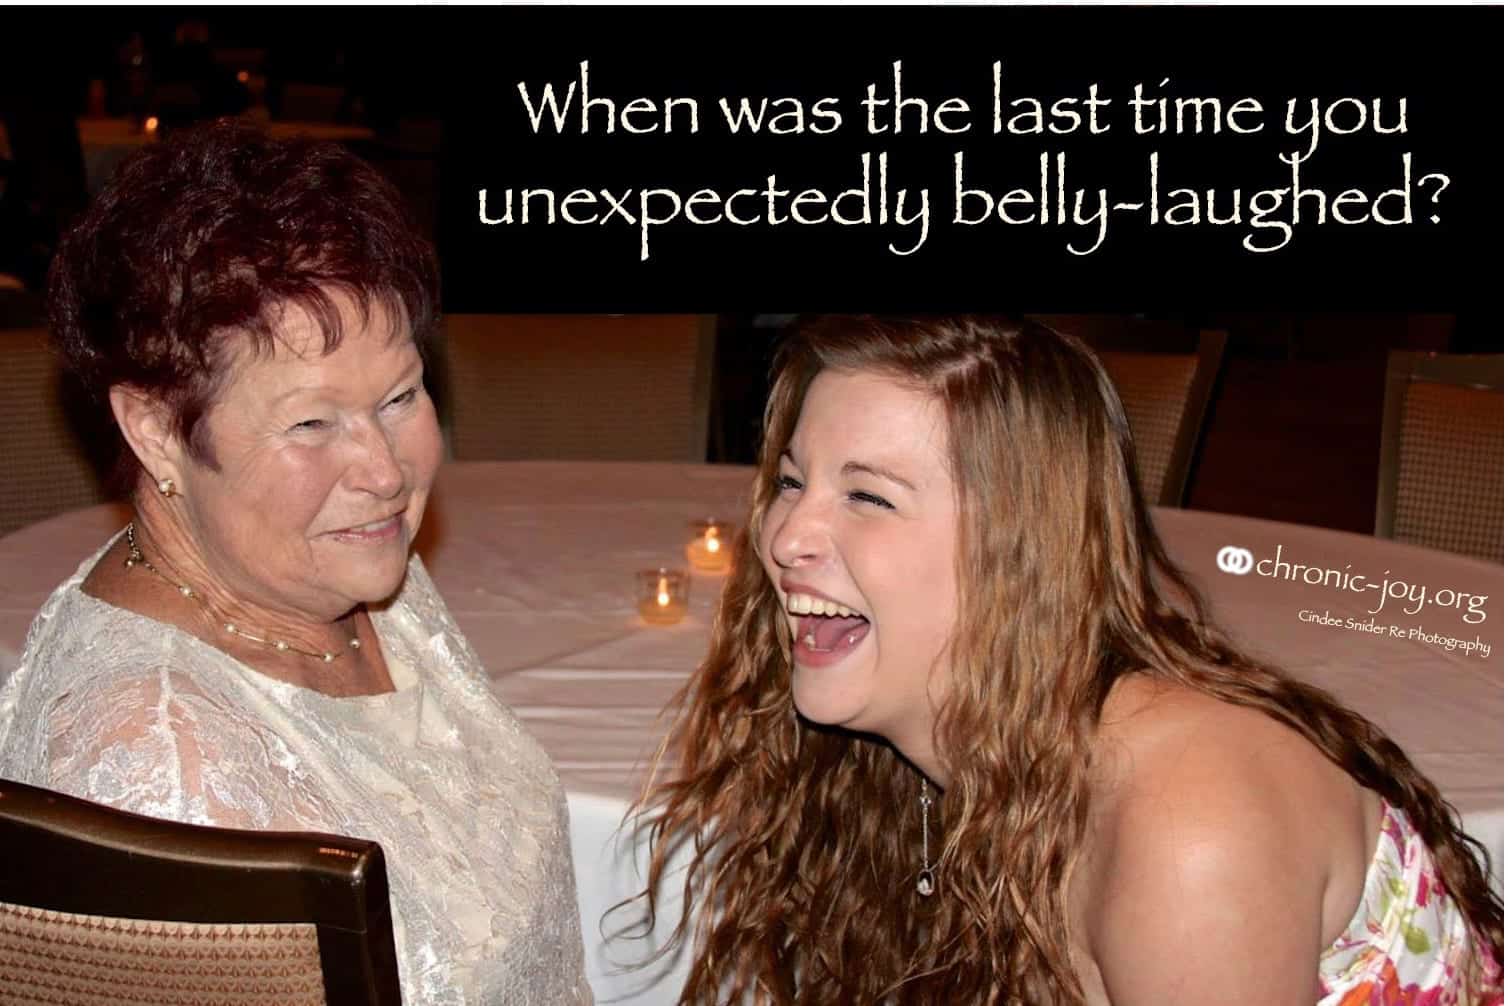 When was the last time you laughed?